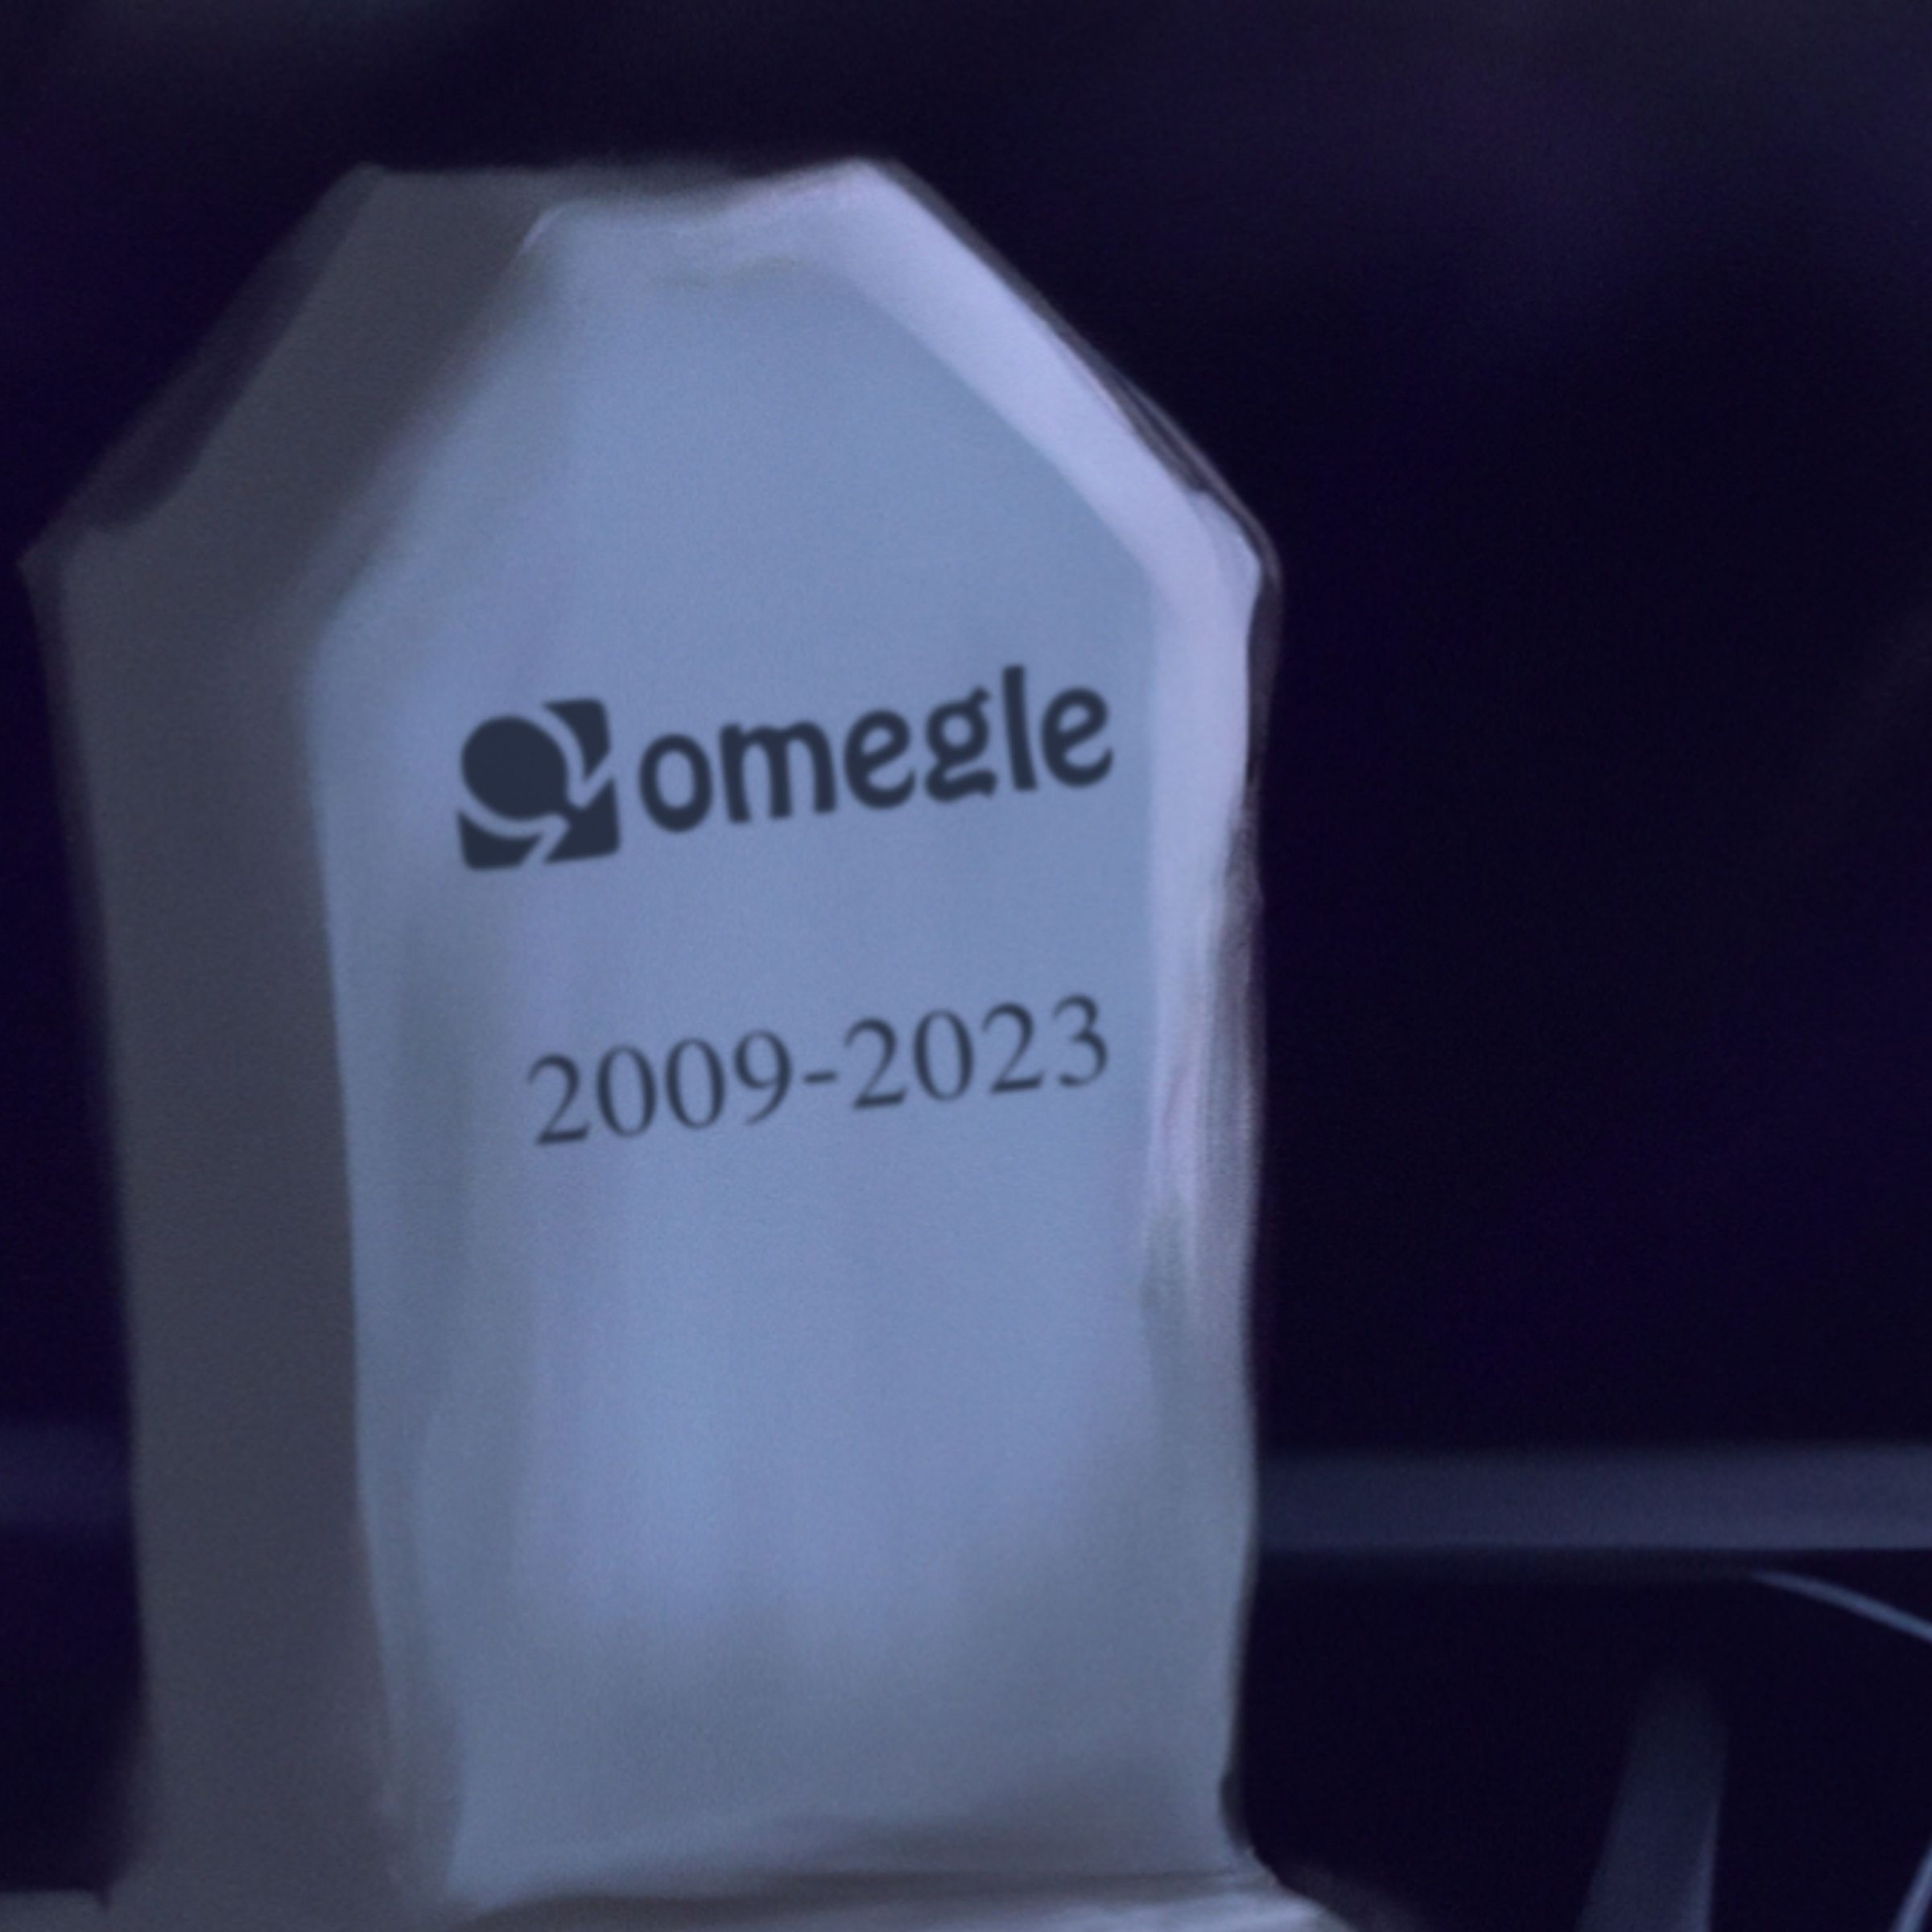 An illustrated gravestone featuring the Omegle logo and a date of 2009 - 2023